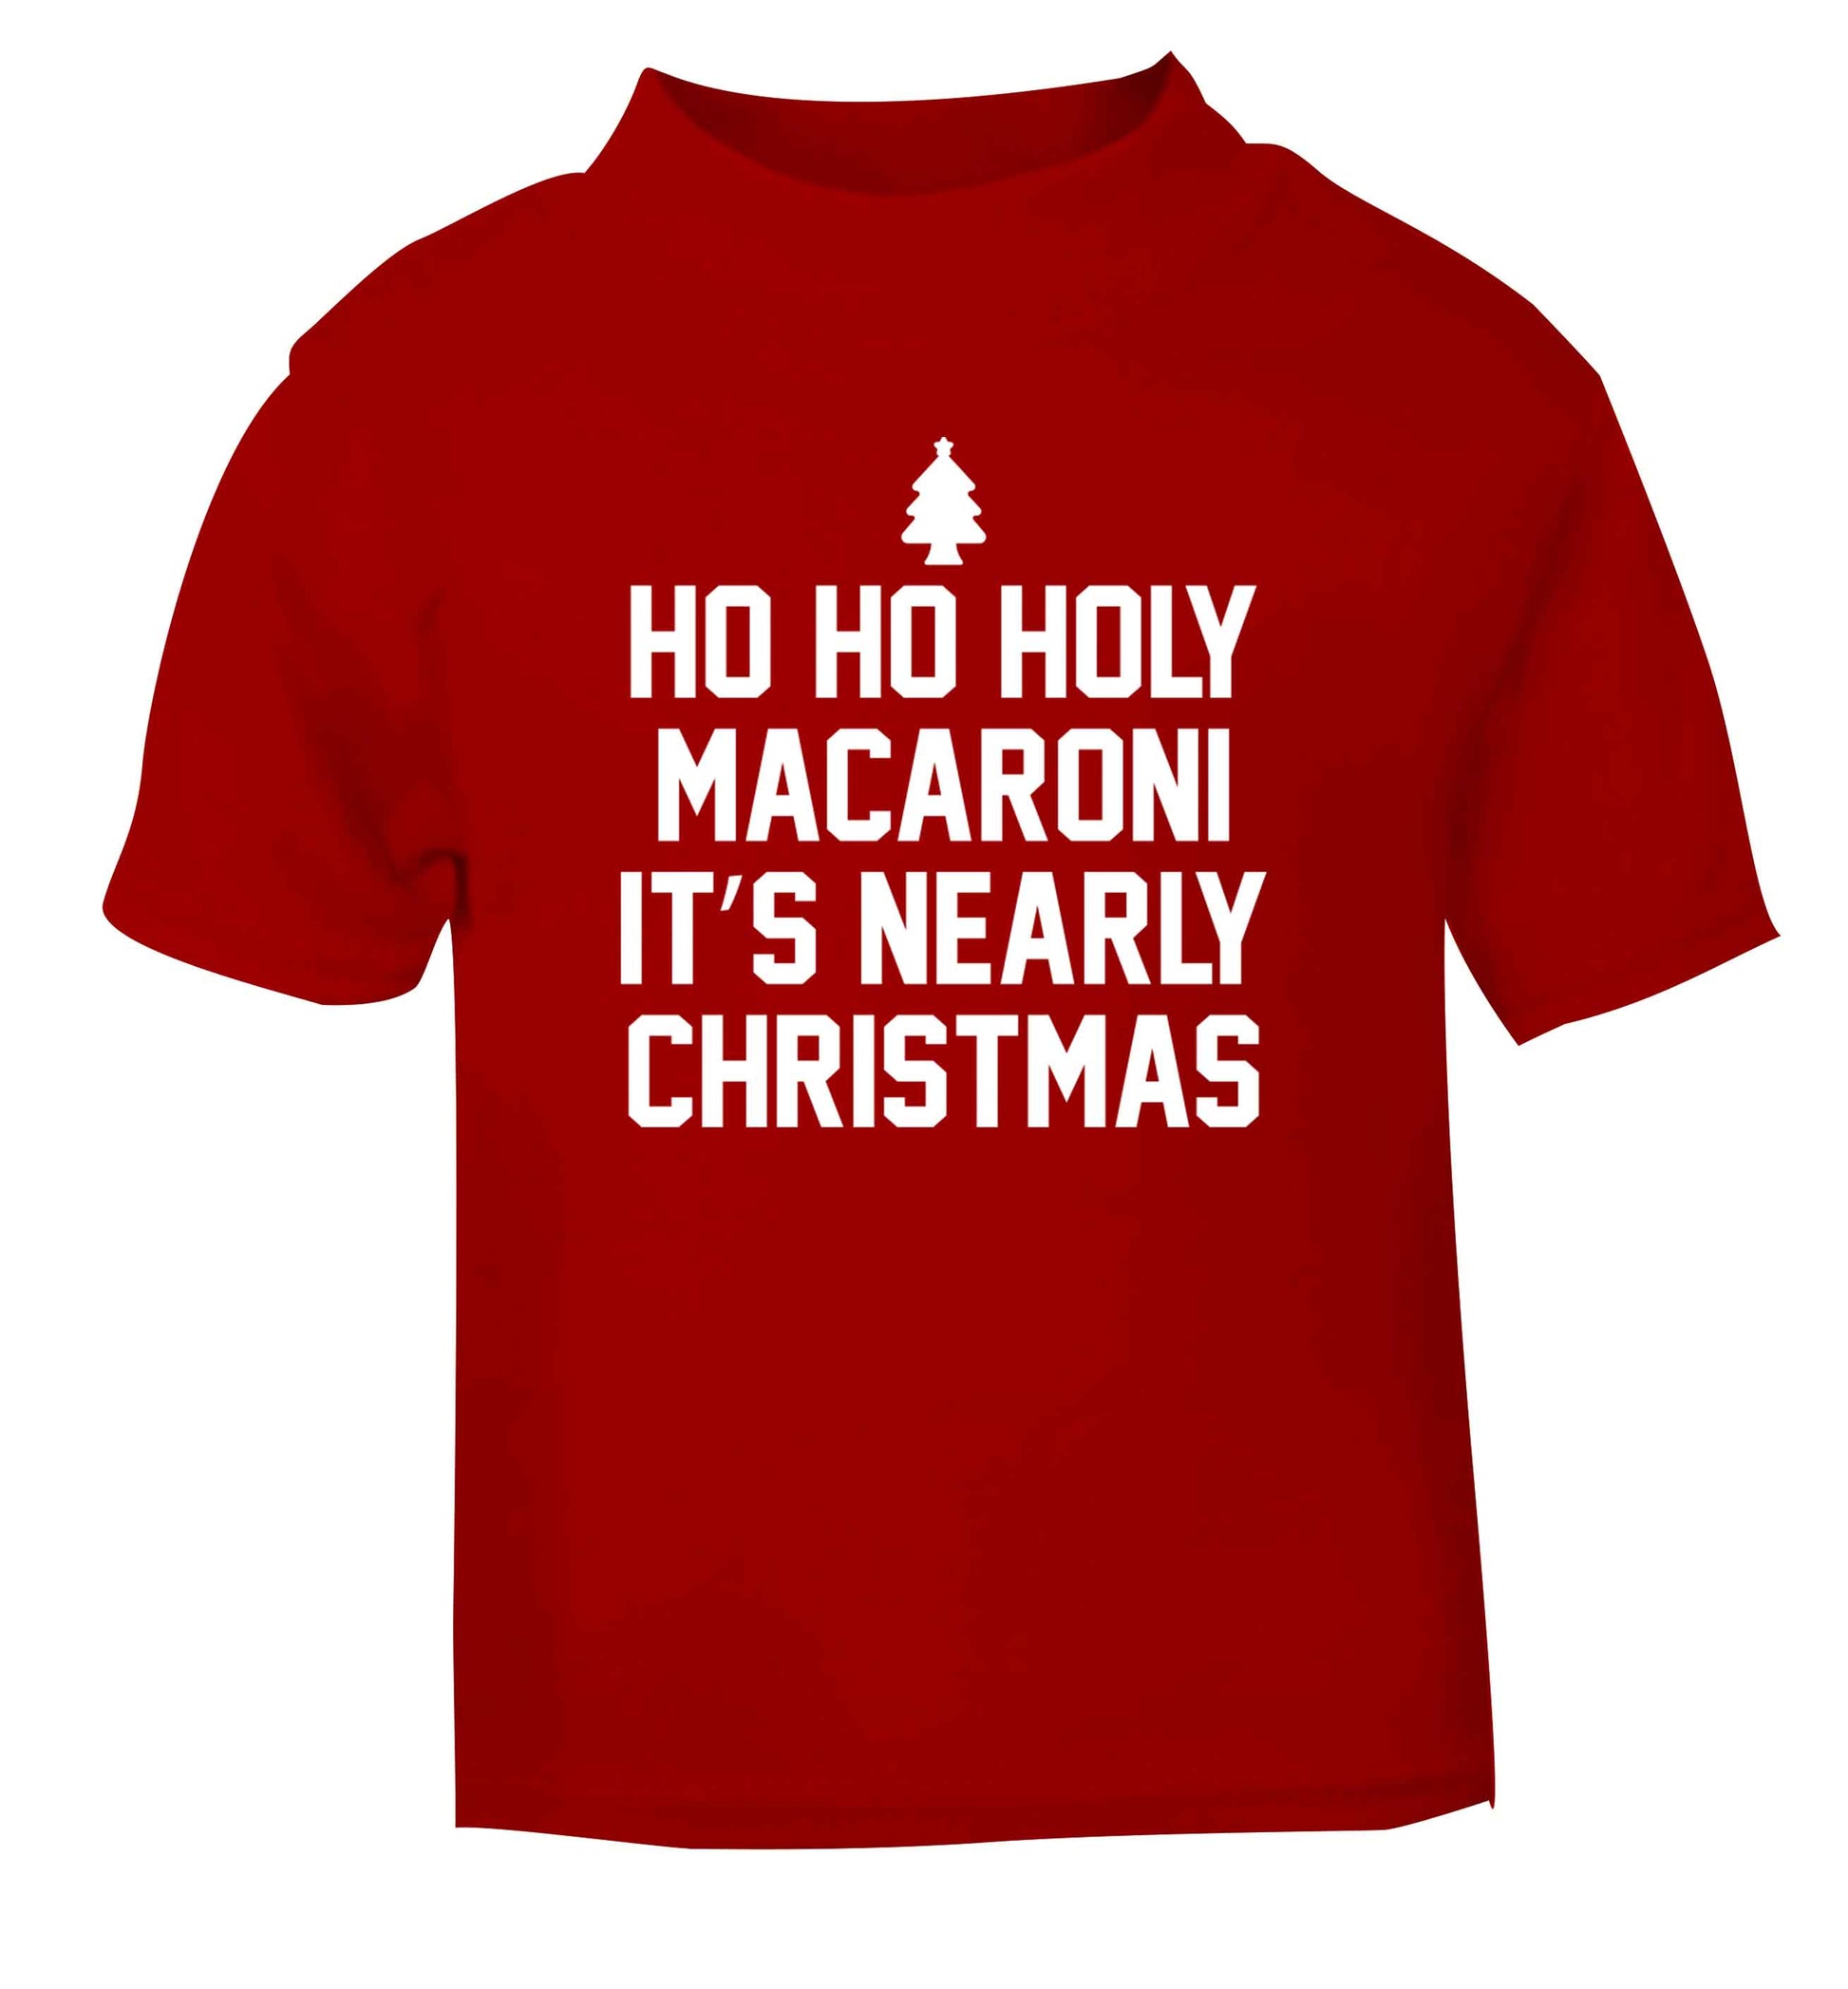 Ho ho holy macaroni it's nearly Christmas red Baby Toddler Tshirt 2 Years